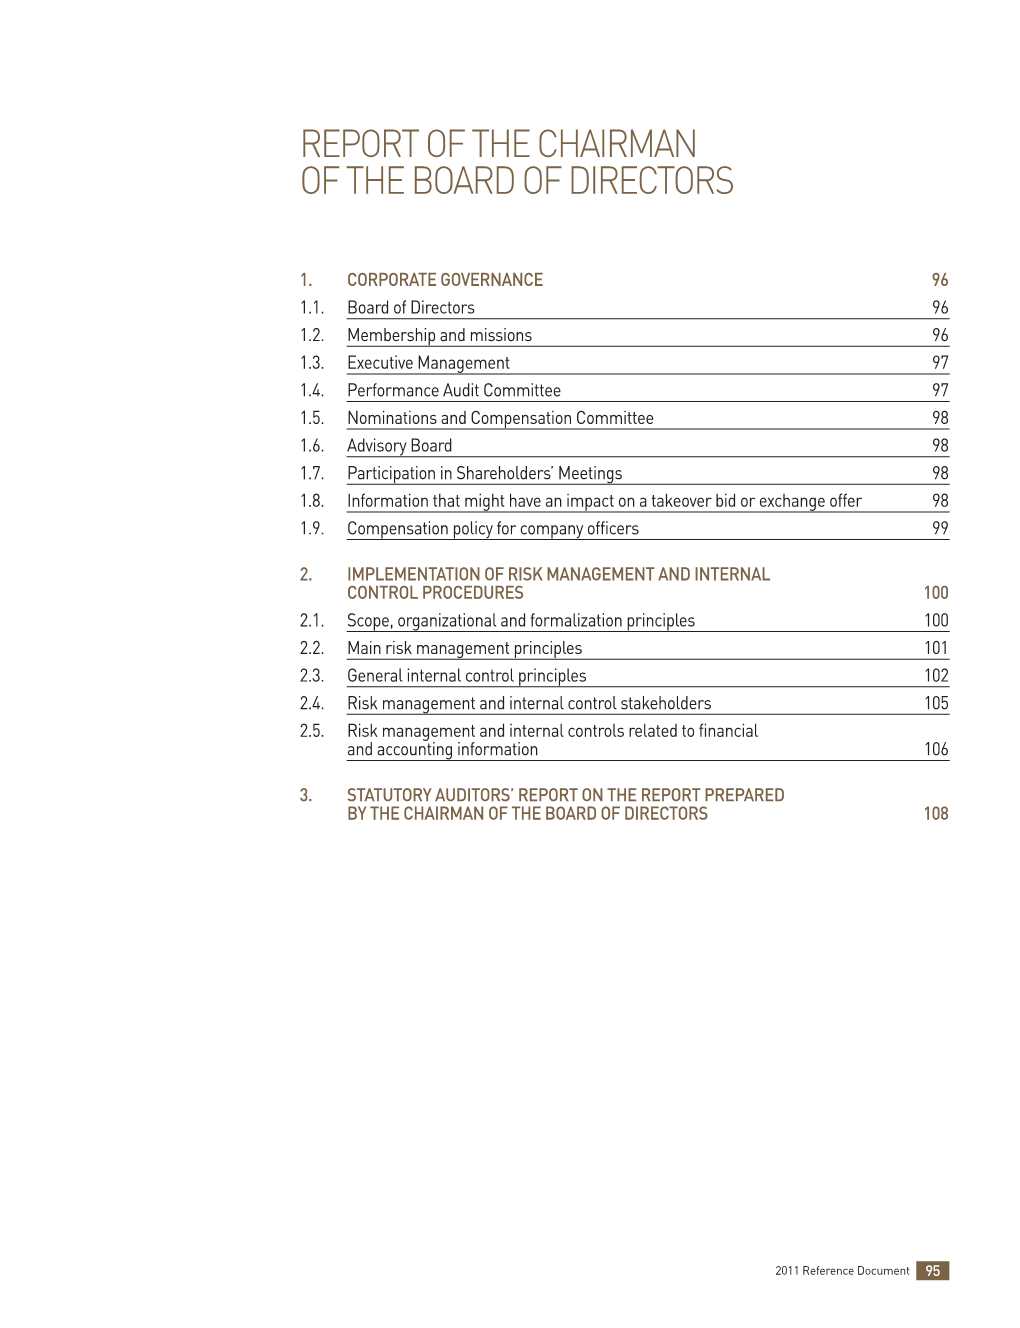 Report on Corporate Governance and Internal Control Procedures